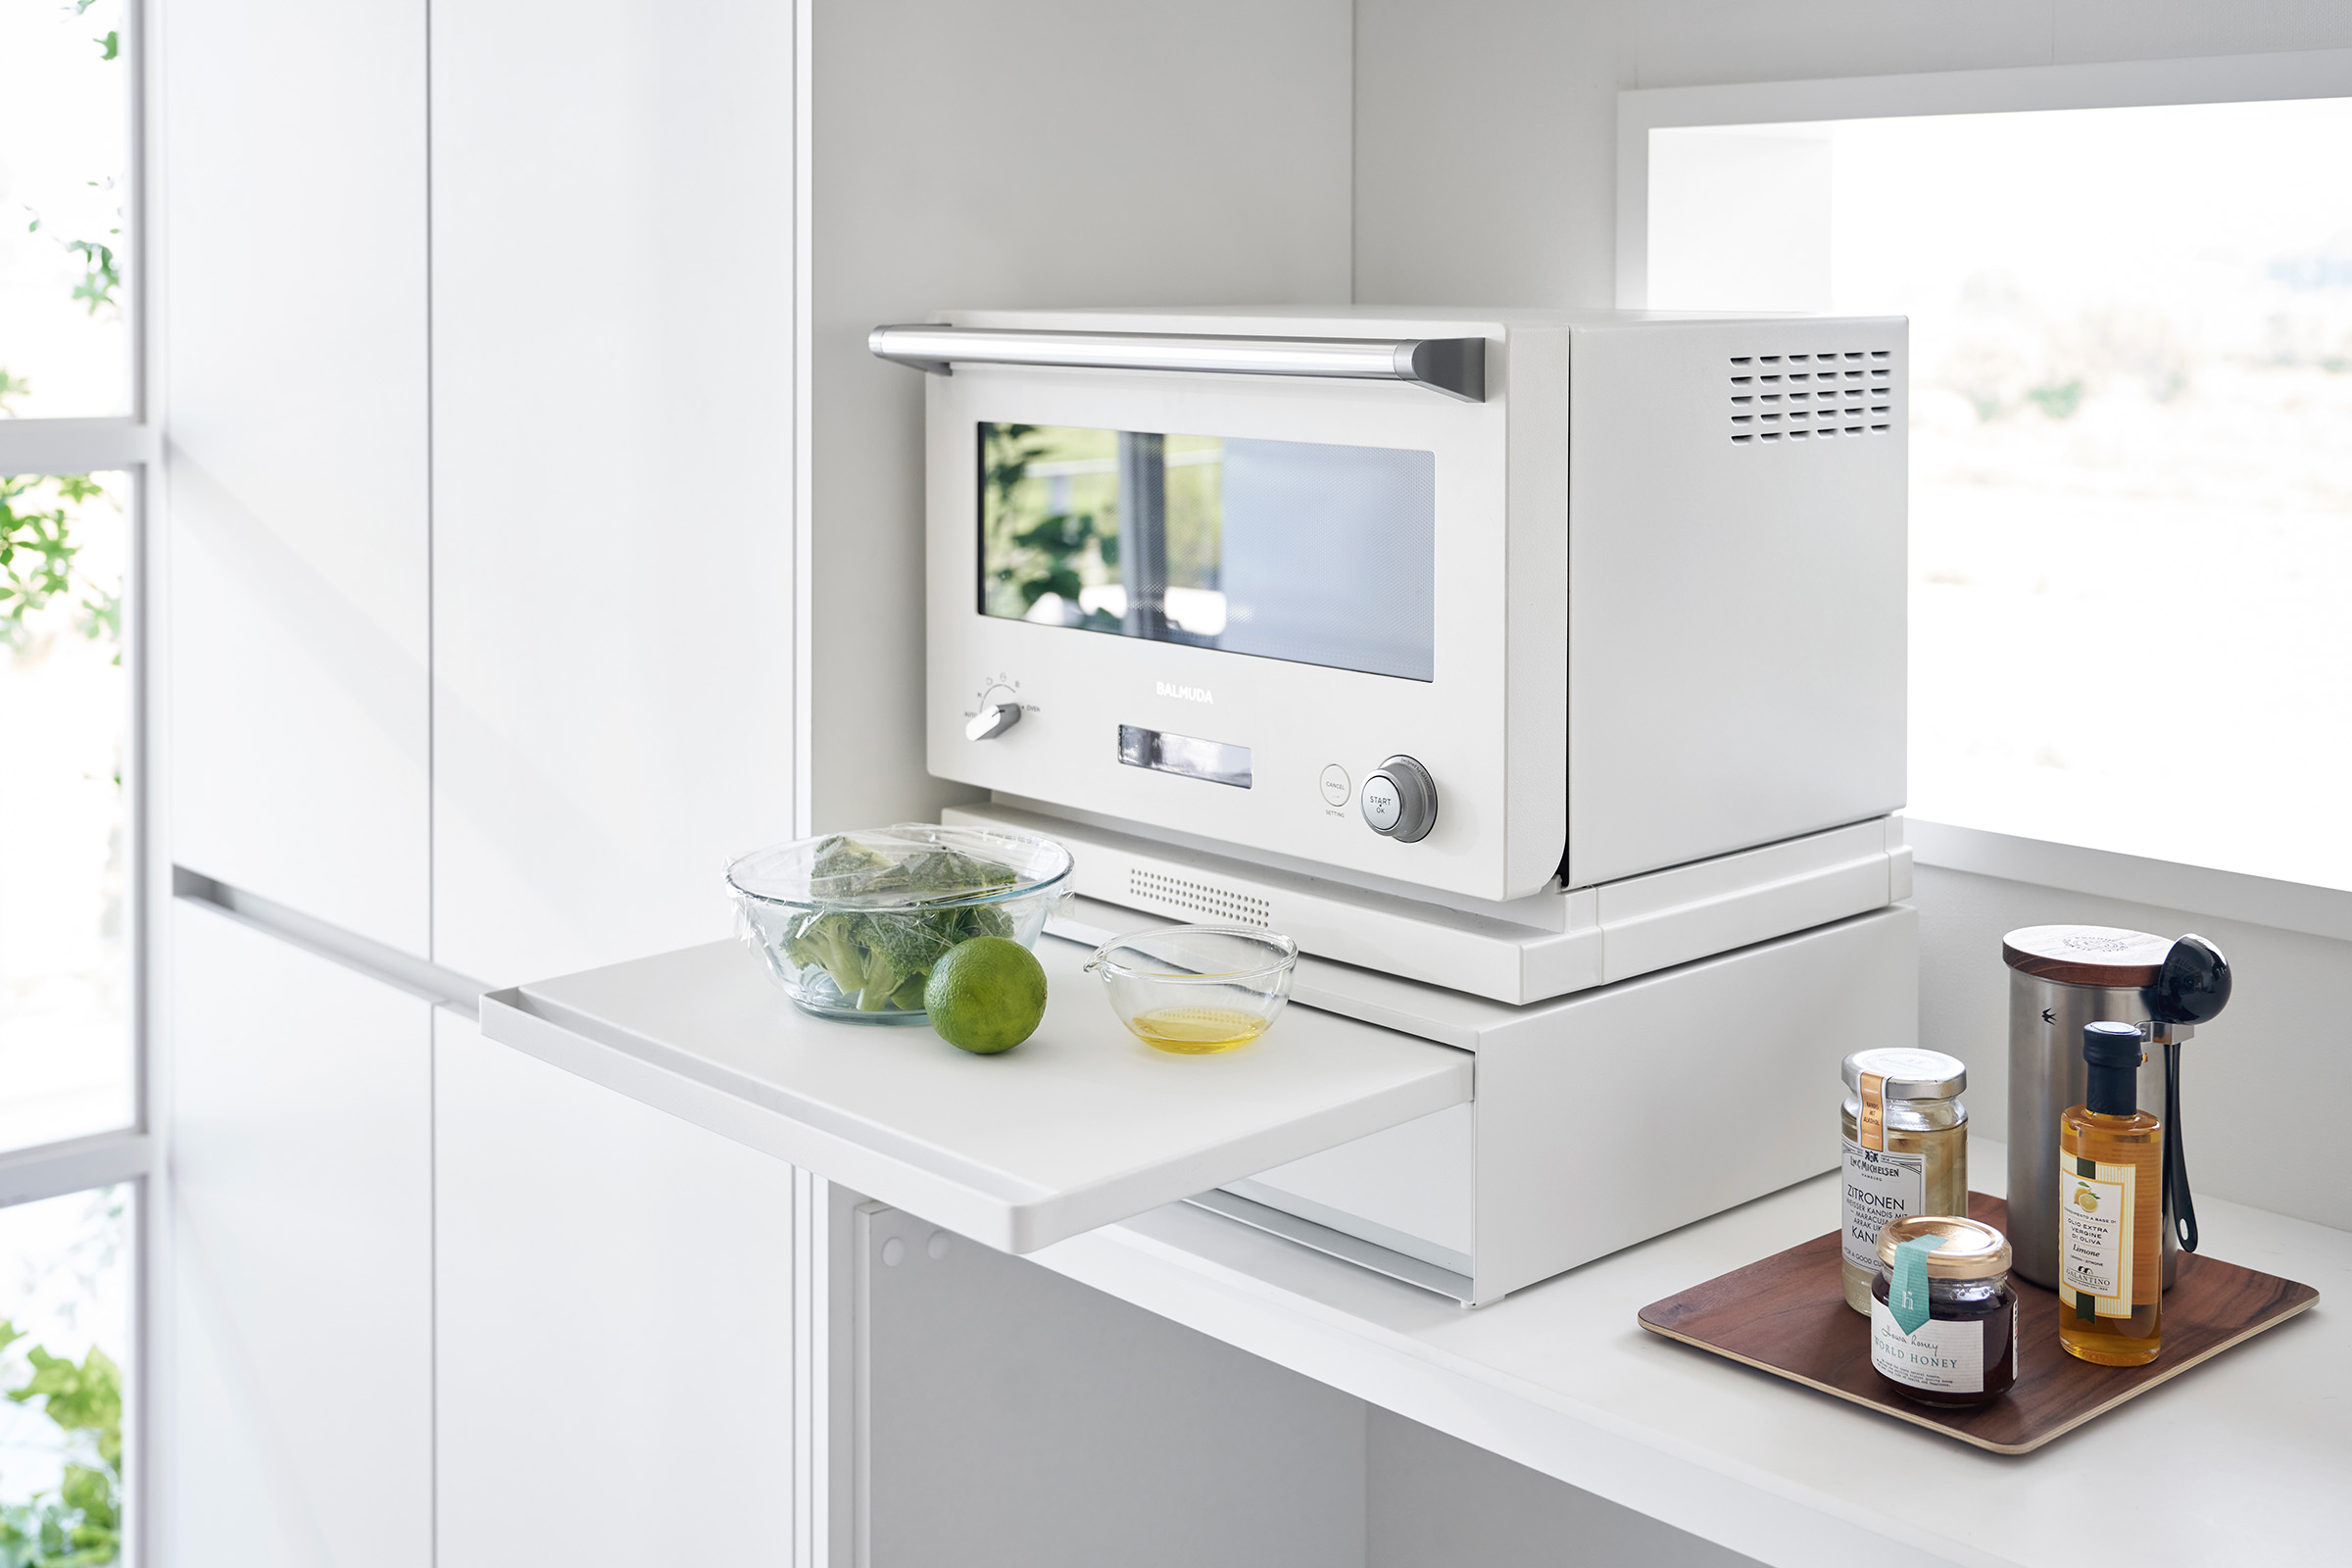 The Countertop Drawer with Pull-Out Shelf by Yamazaki Home in white with the shelf pulled out. Containers of food and a lime sits on the shelf.